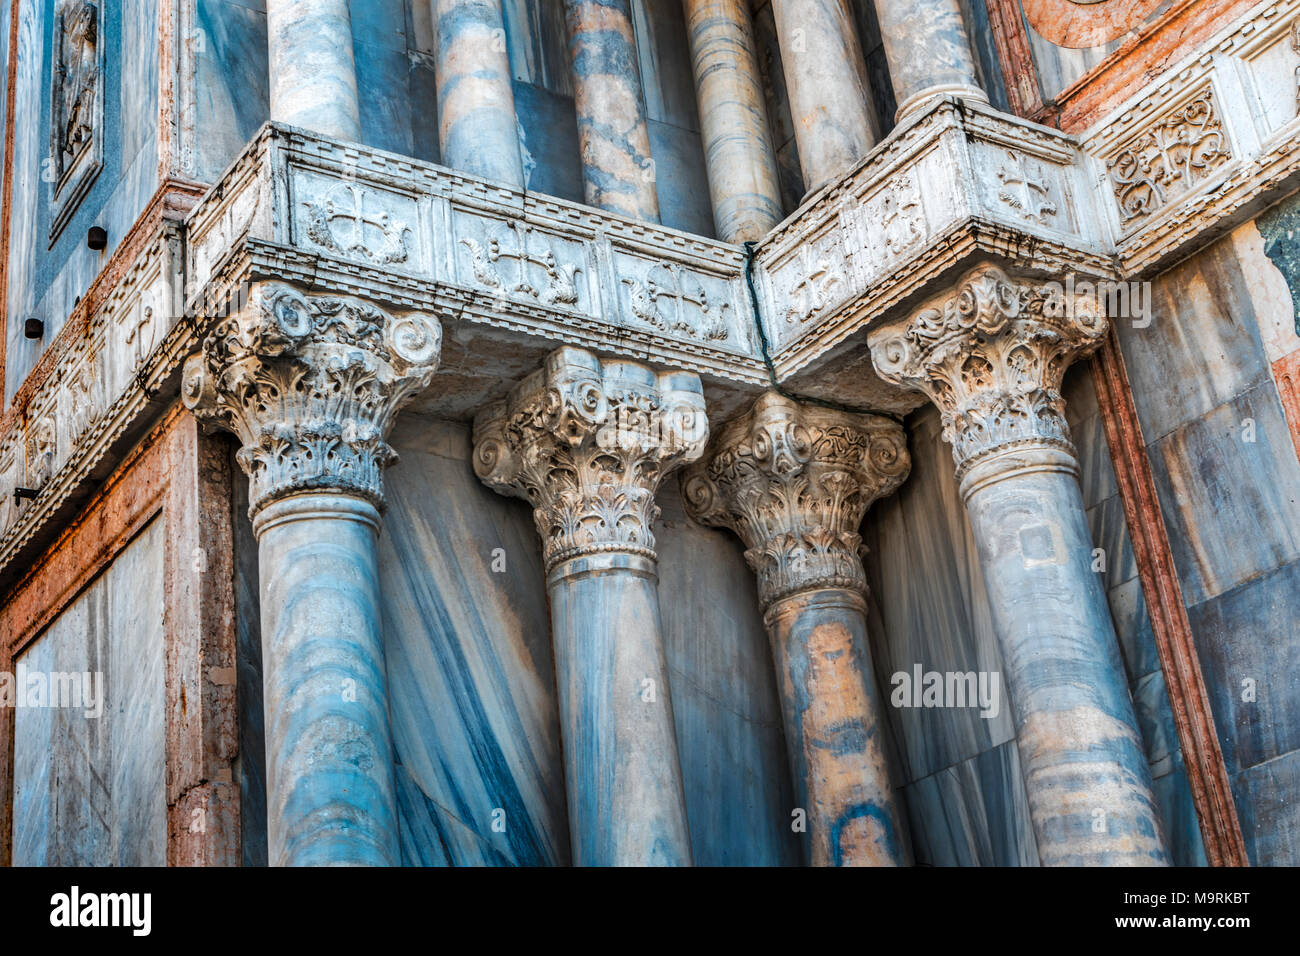 Corinthian columns and panels of decorative blue marble on the north facade of St Marks Basilica in Venice, in the Piazzetta dei Leoncini Stock Photo